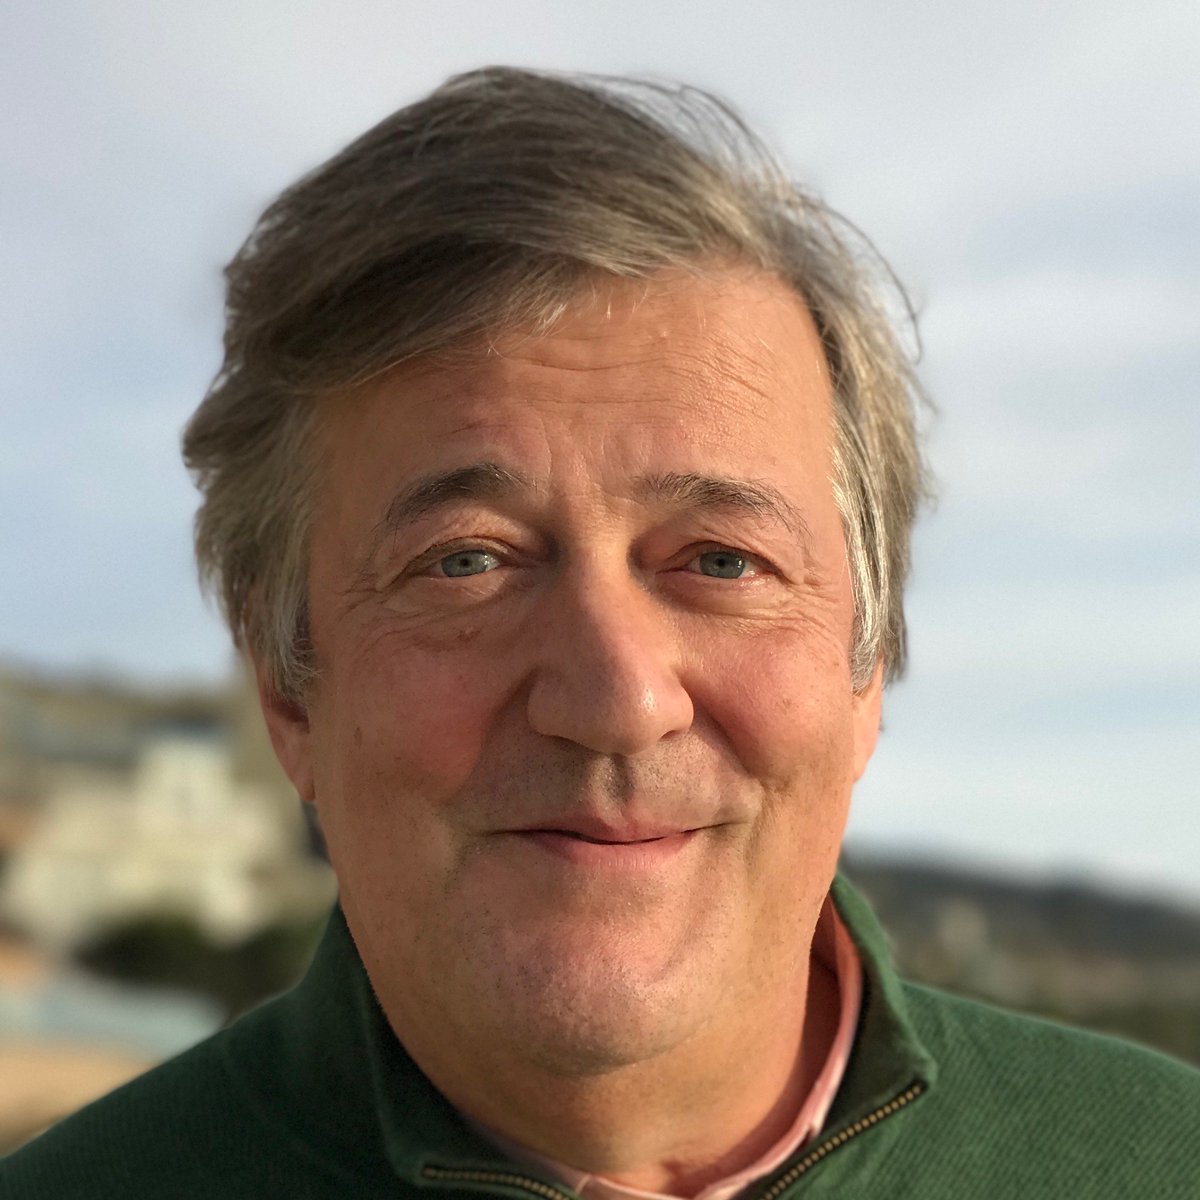 Actor, broadcaster and long-standing supporter, @StephenFry is the voice over on our brand-new TV appeal. After being diagnosed with prostate cancer in 2018, we're very grateful for his ongoing support. 📺 Watch the full appeal here: bit.ly/3uIcHb1